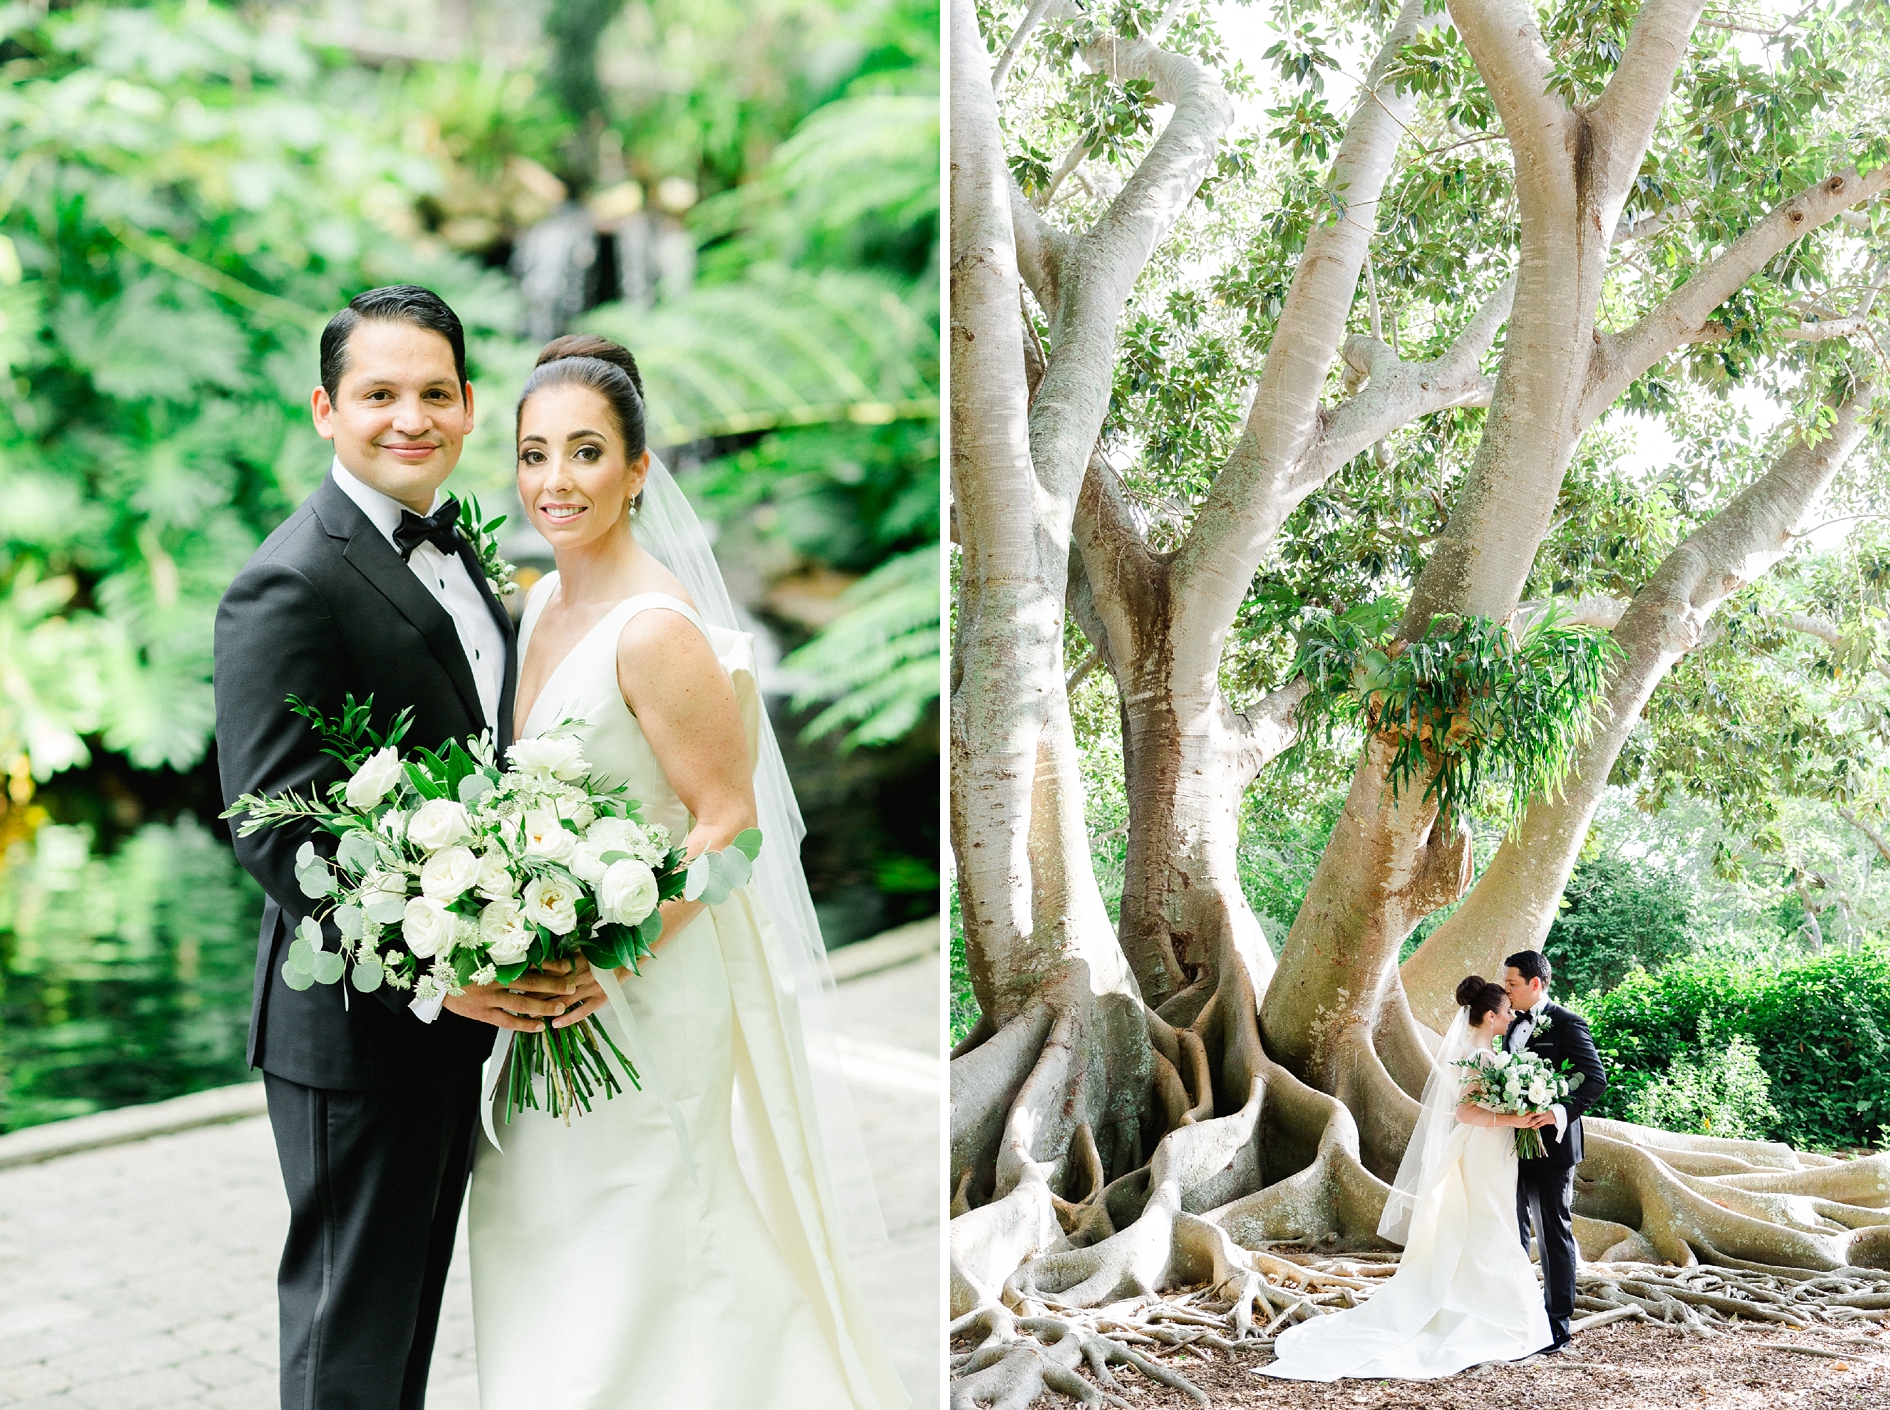 Marie Selby Botanical Gardens Wedding | © Ailyn La Torre Photography 2017